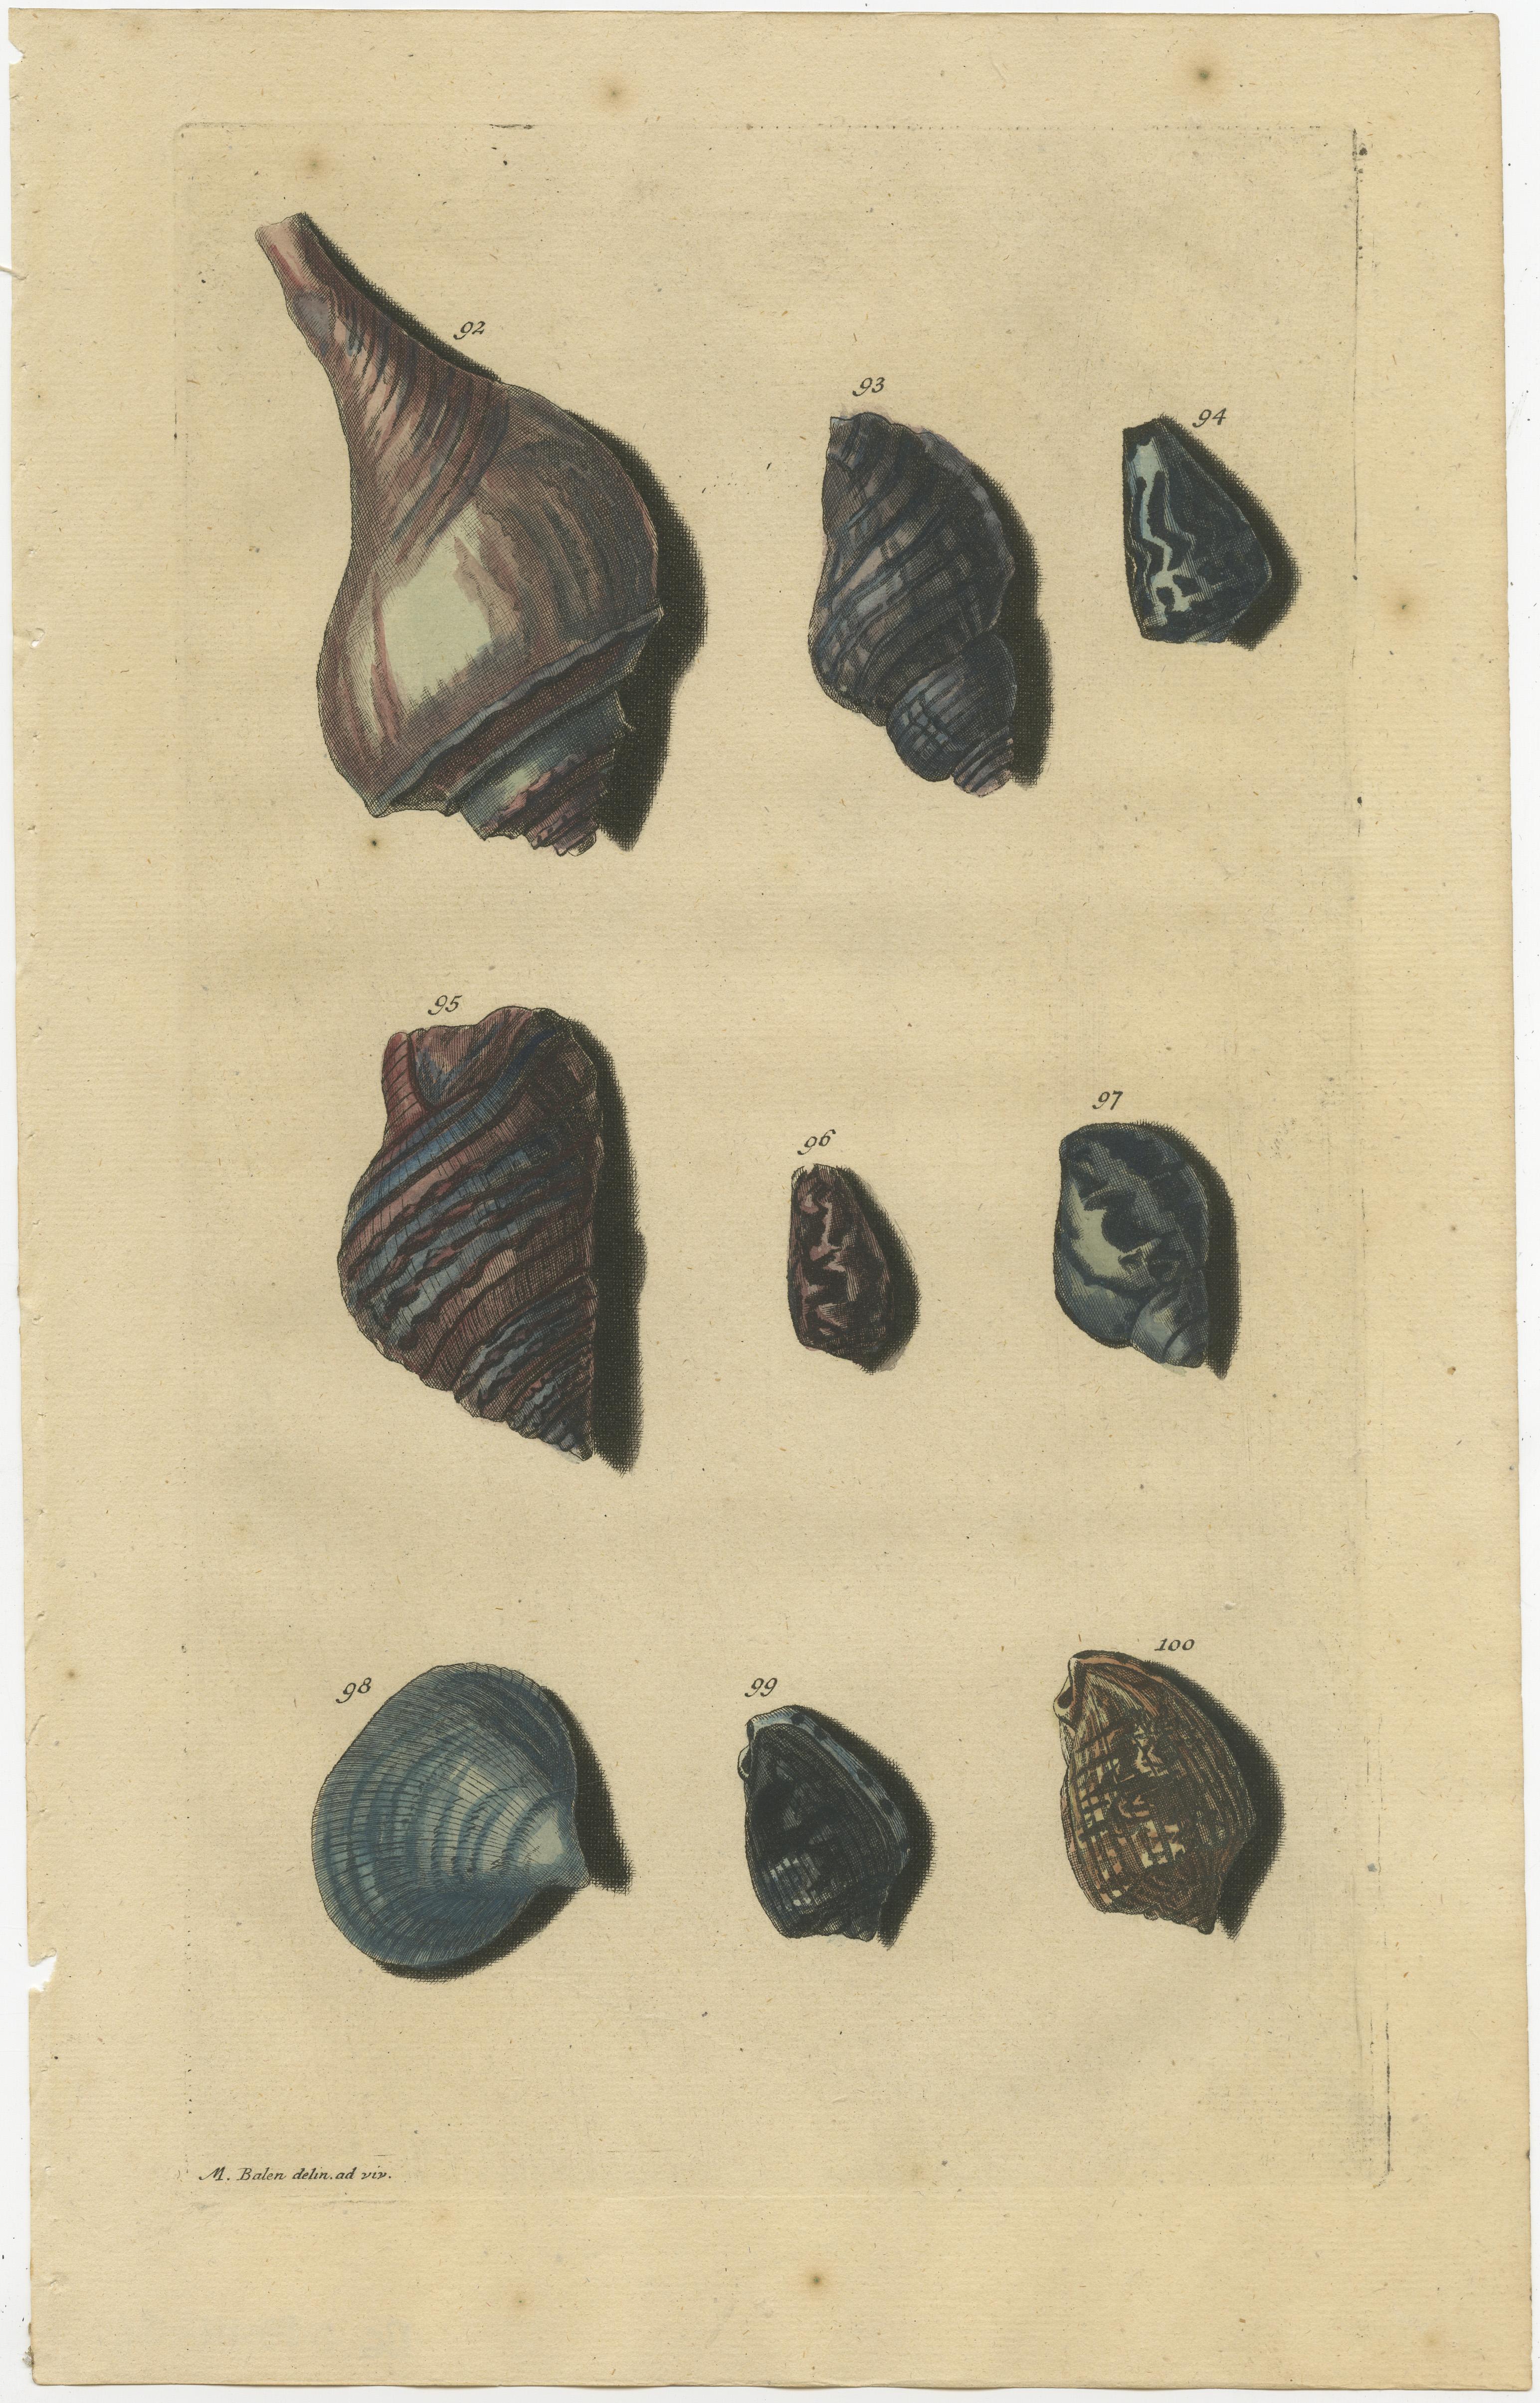 Set of four antique prints of various sea shells and molluscs. These print originate from 'Oud en Nieuw Oost-Indiën' by F. Valentijn.

François Valentyn or Valentijn (17 April 1666 – 6 August 1727) was a Dutch Calvinist minister, naturalist and